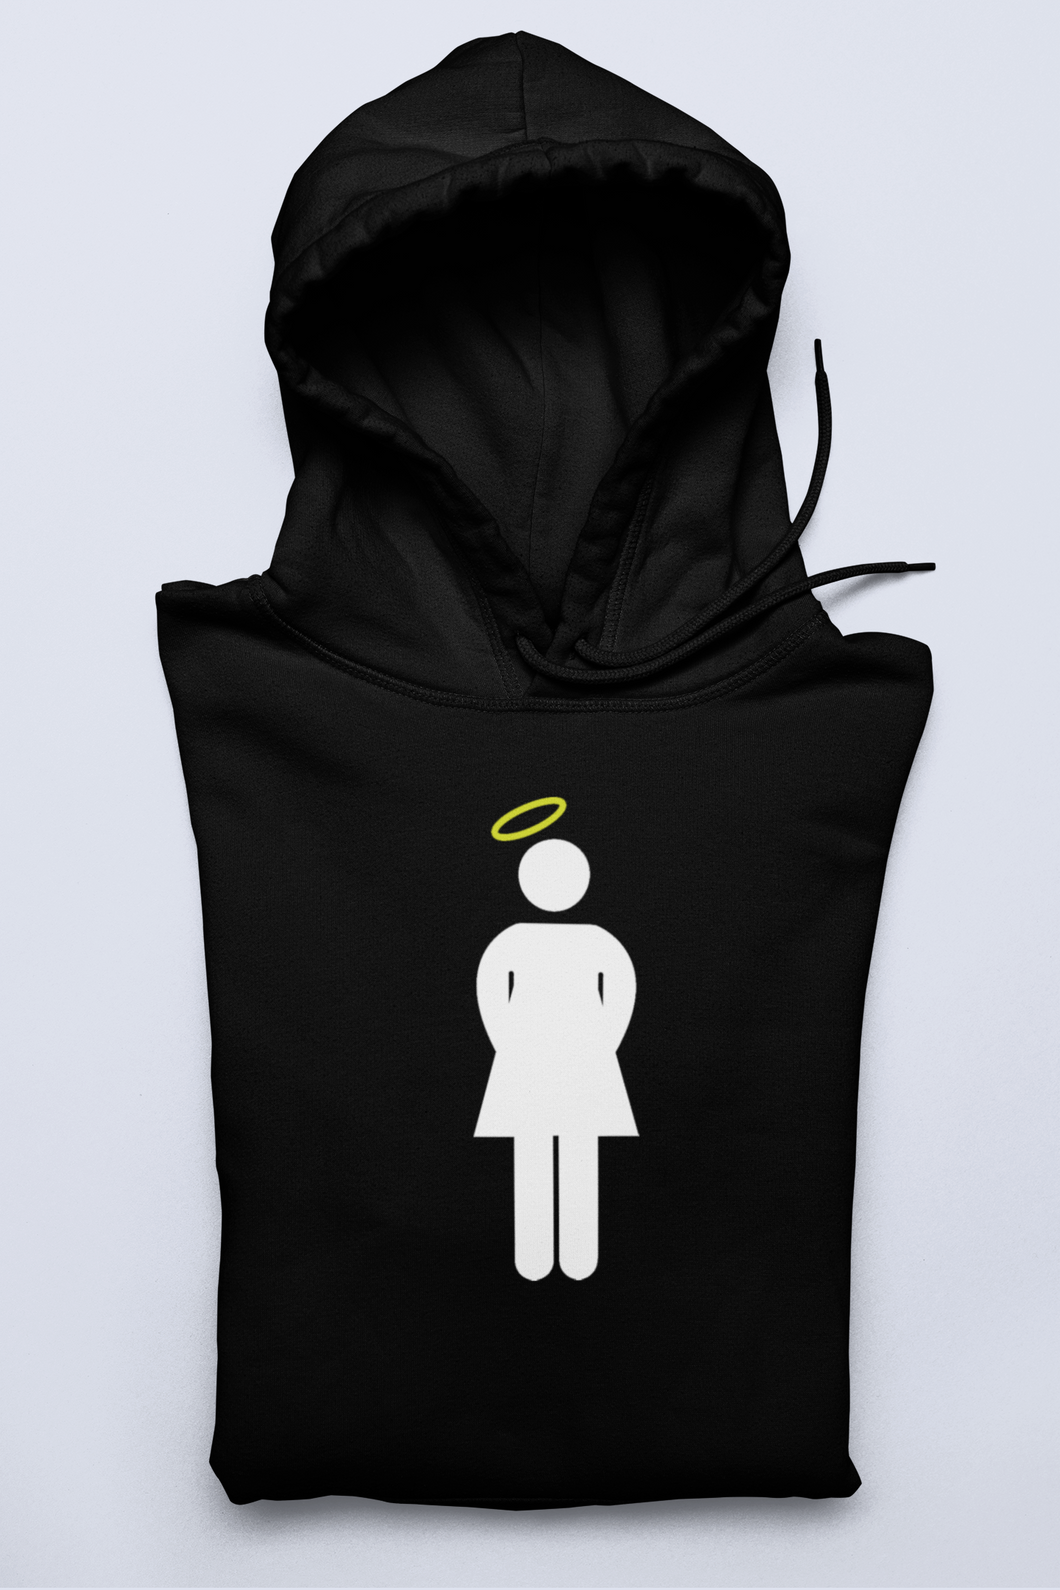 Buy Online Unique High Quality Crooked Halo Crew Hoodie (Her Design) - J. Wesley Collection